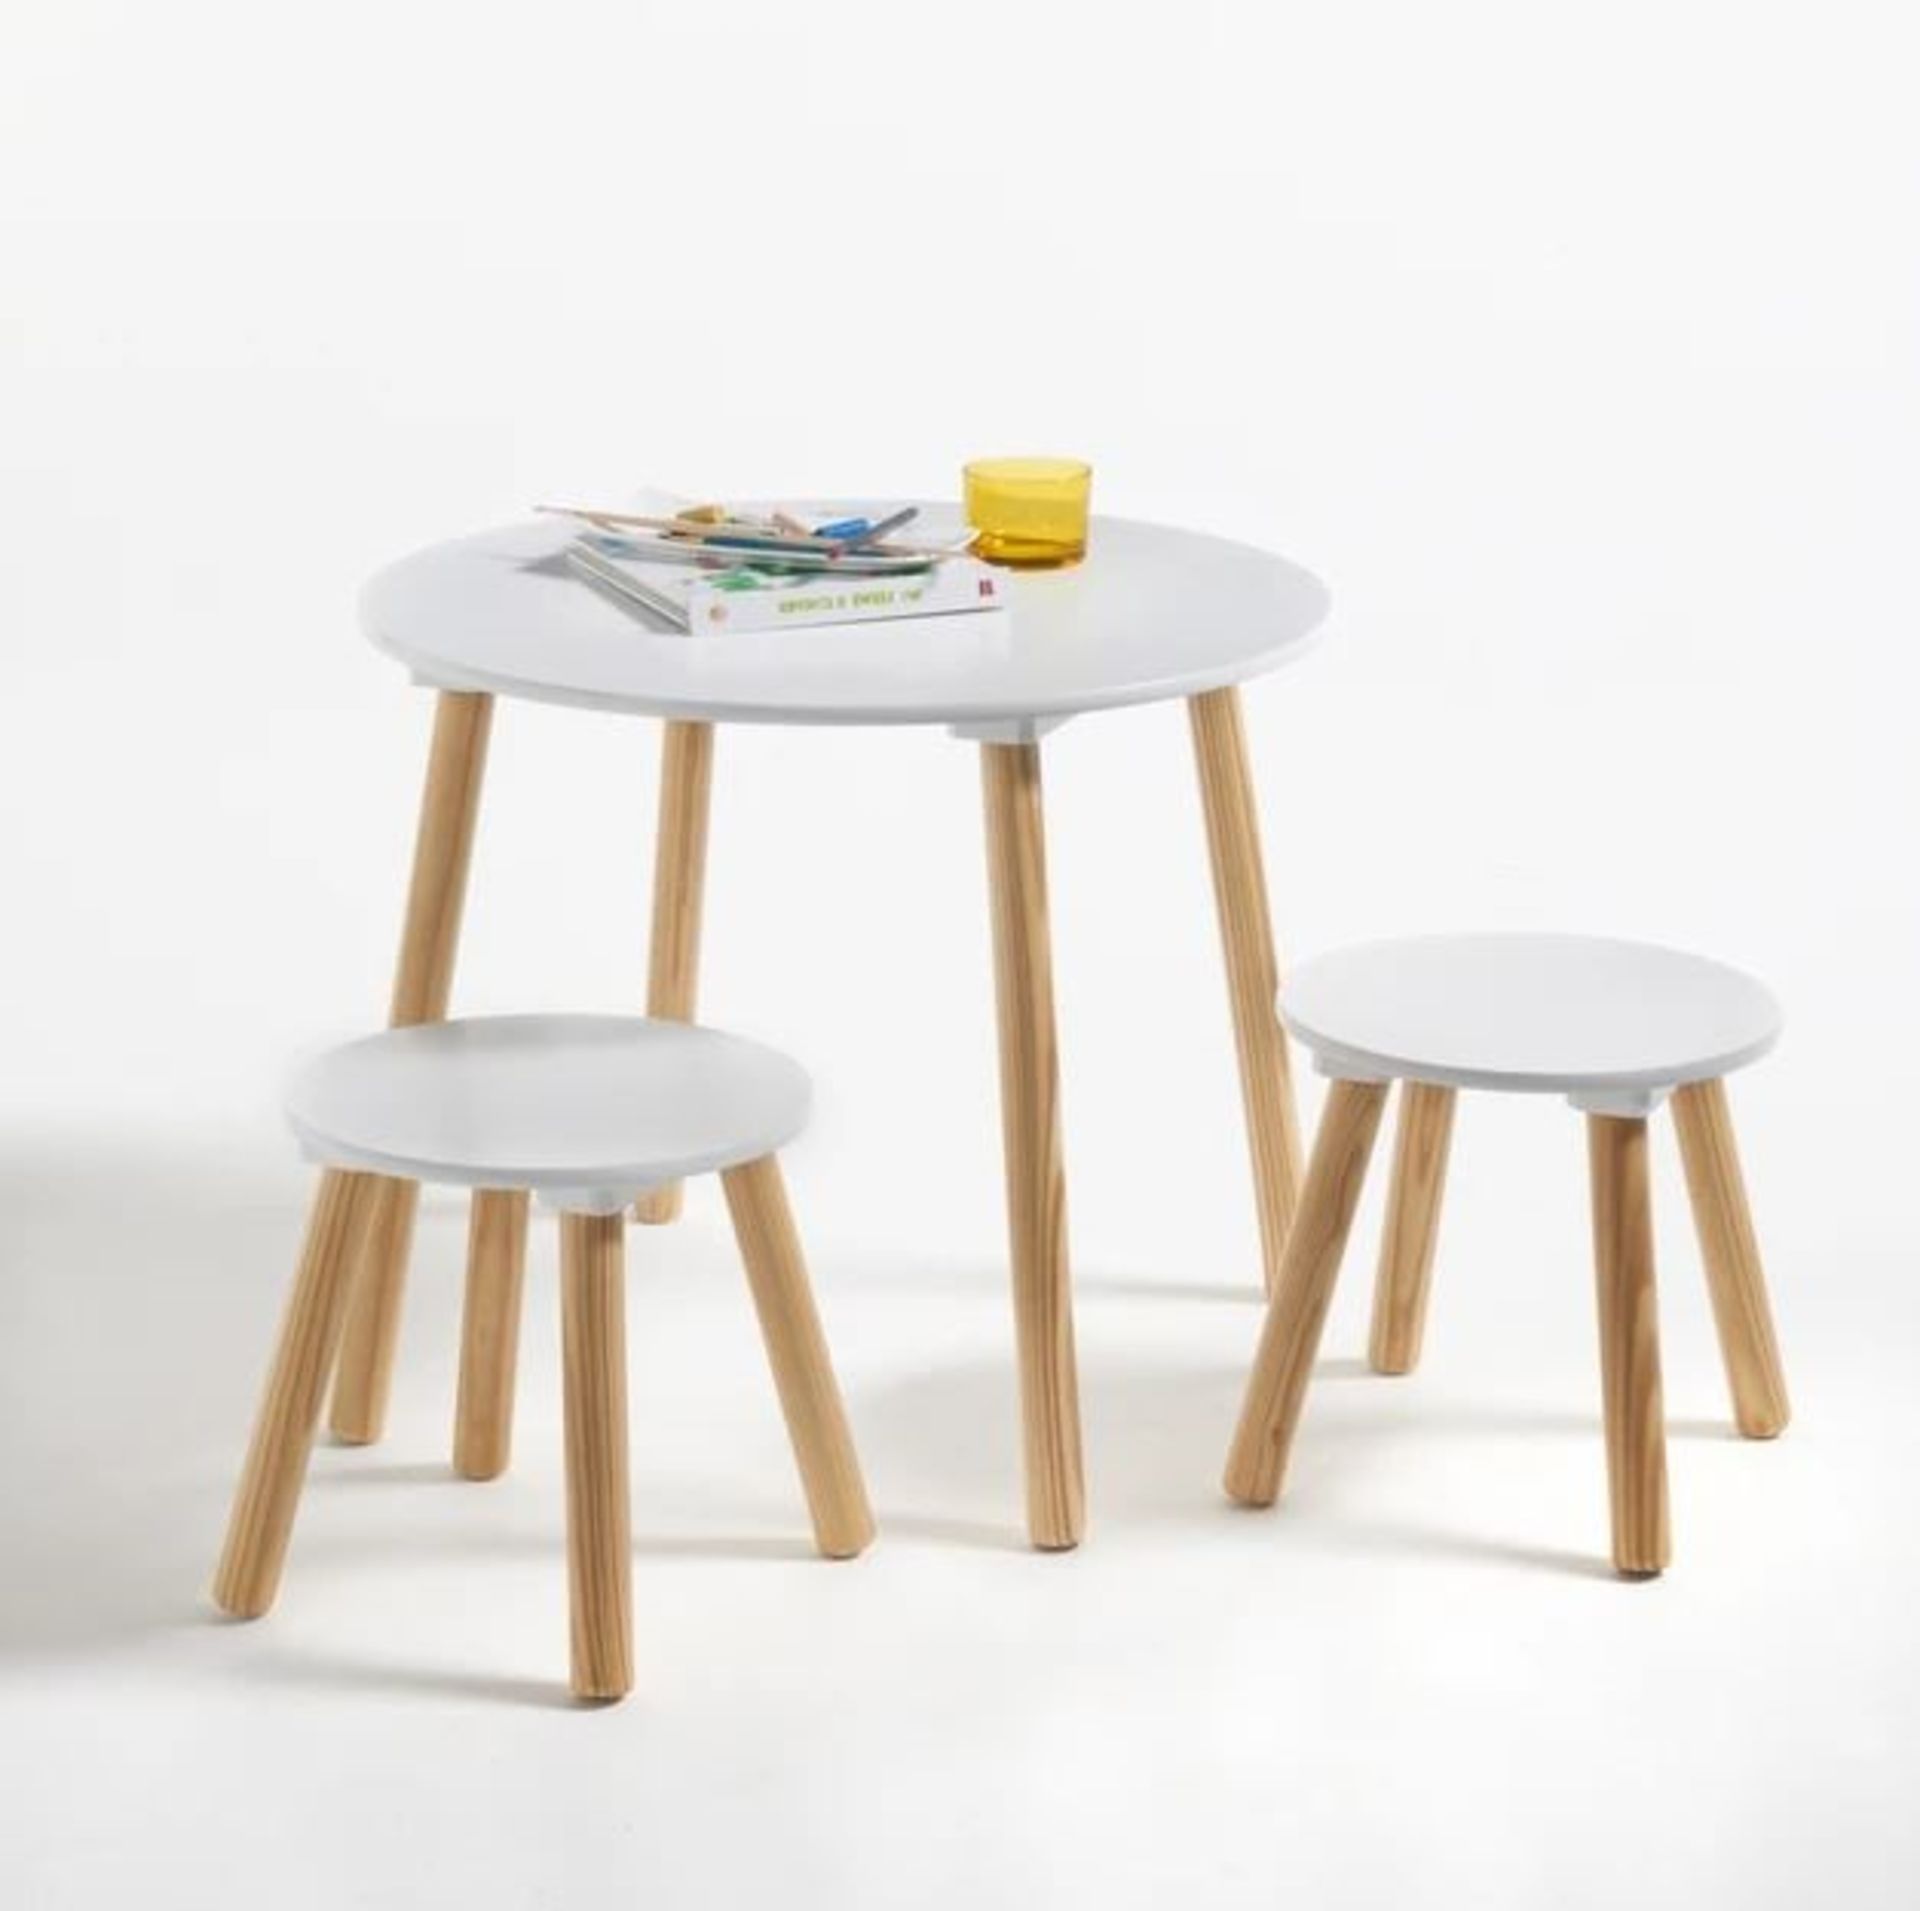 LA REDOUTE JIMI CHILDREN'S TABLE AND STOOLS